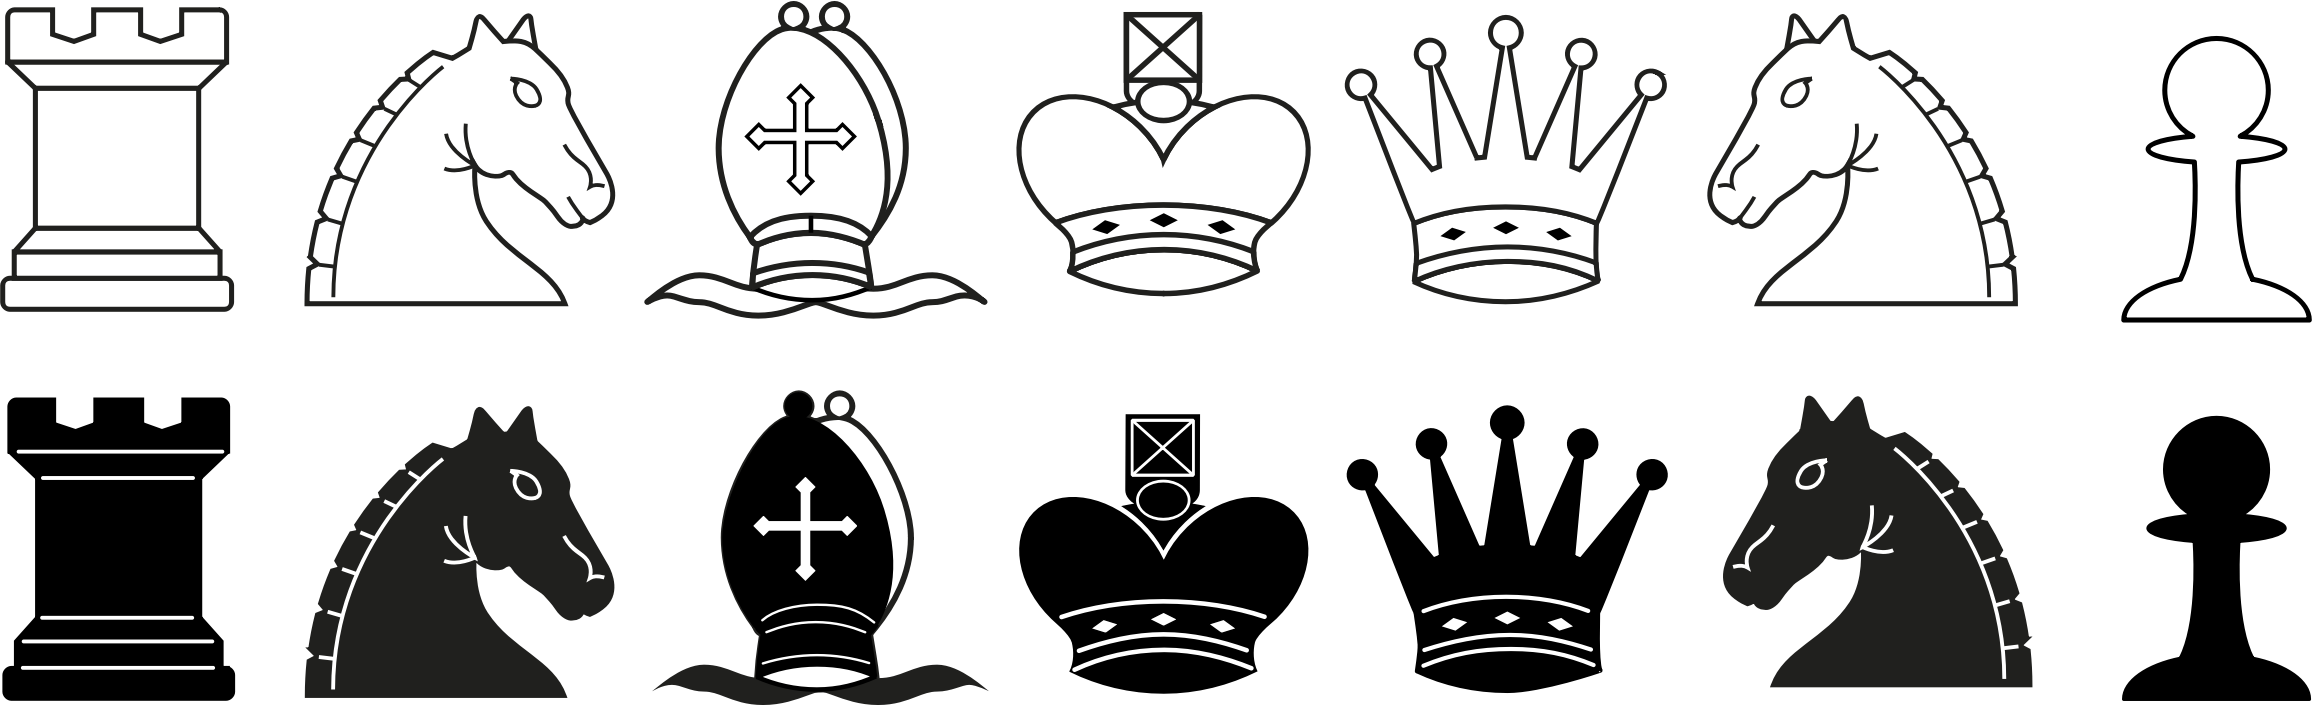 Chess Pieces Set Clip Art At 